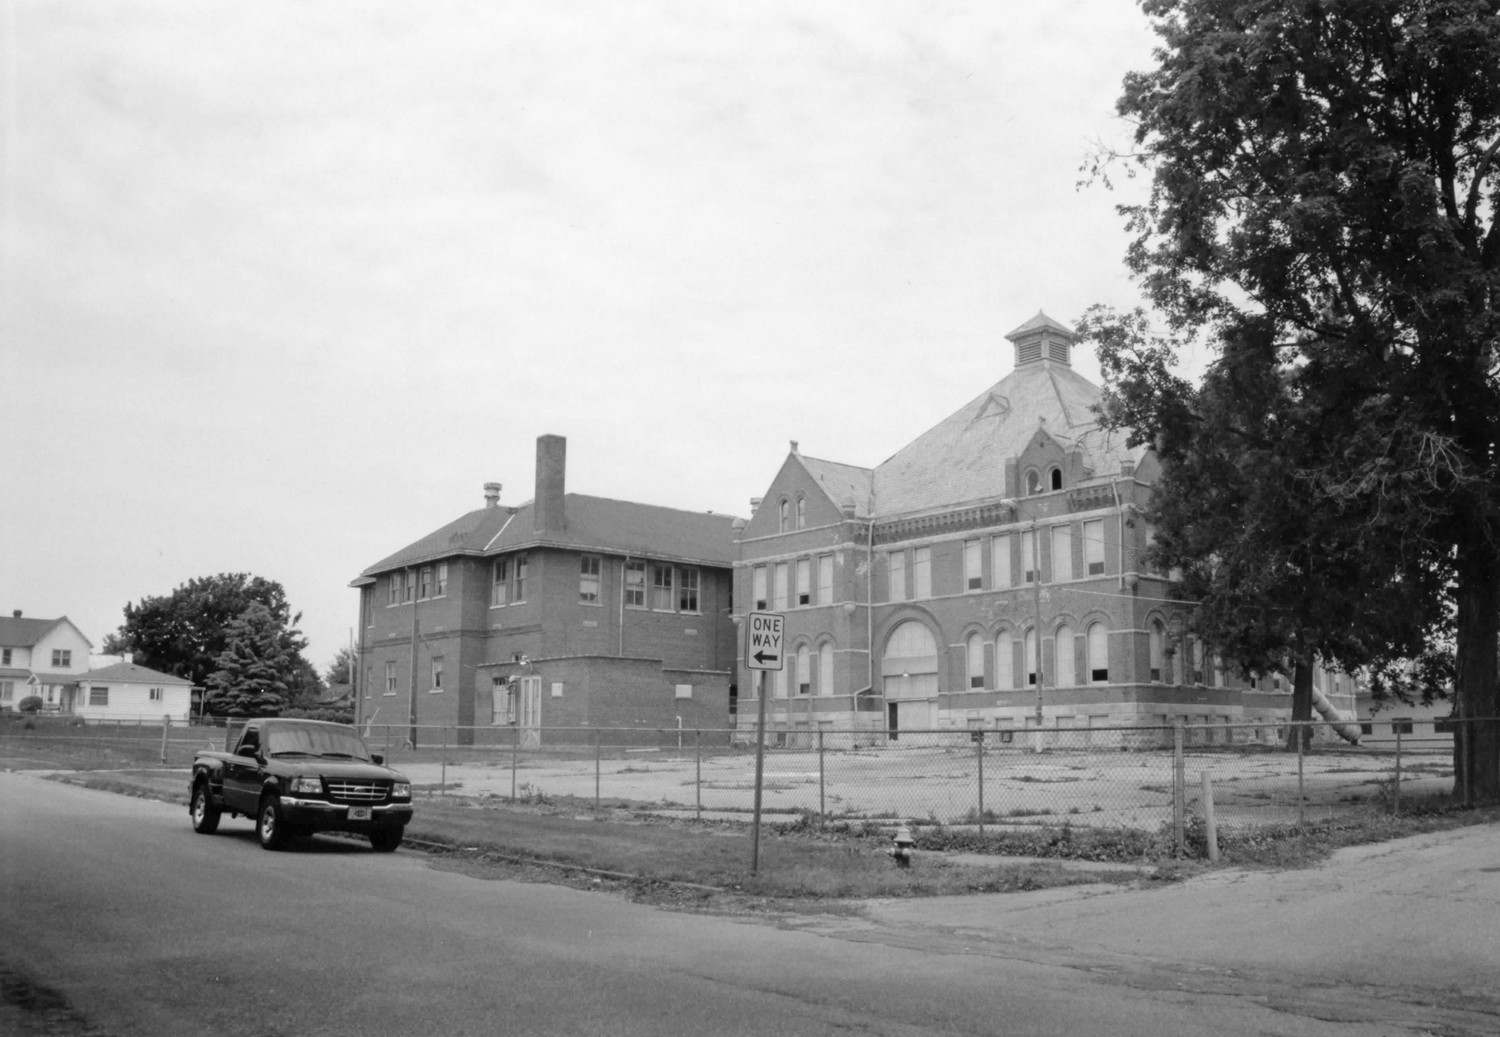 Gas City High School - East Ward School, Gas City Indiana 1894 building and 1923 addition, south and east elevations, looking northwest (2003)